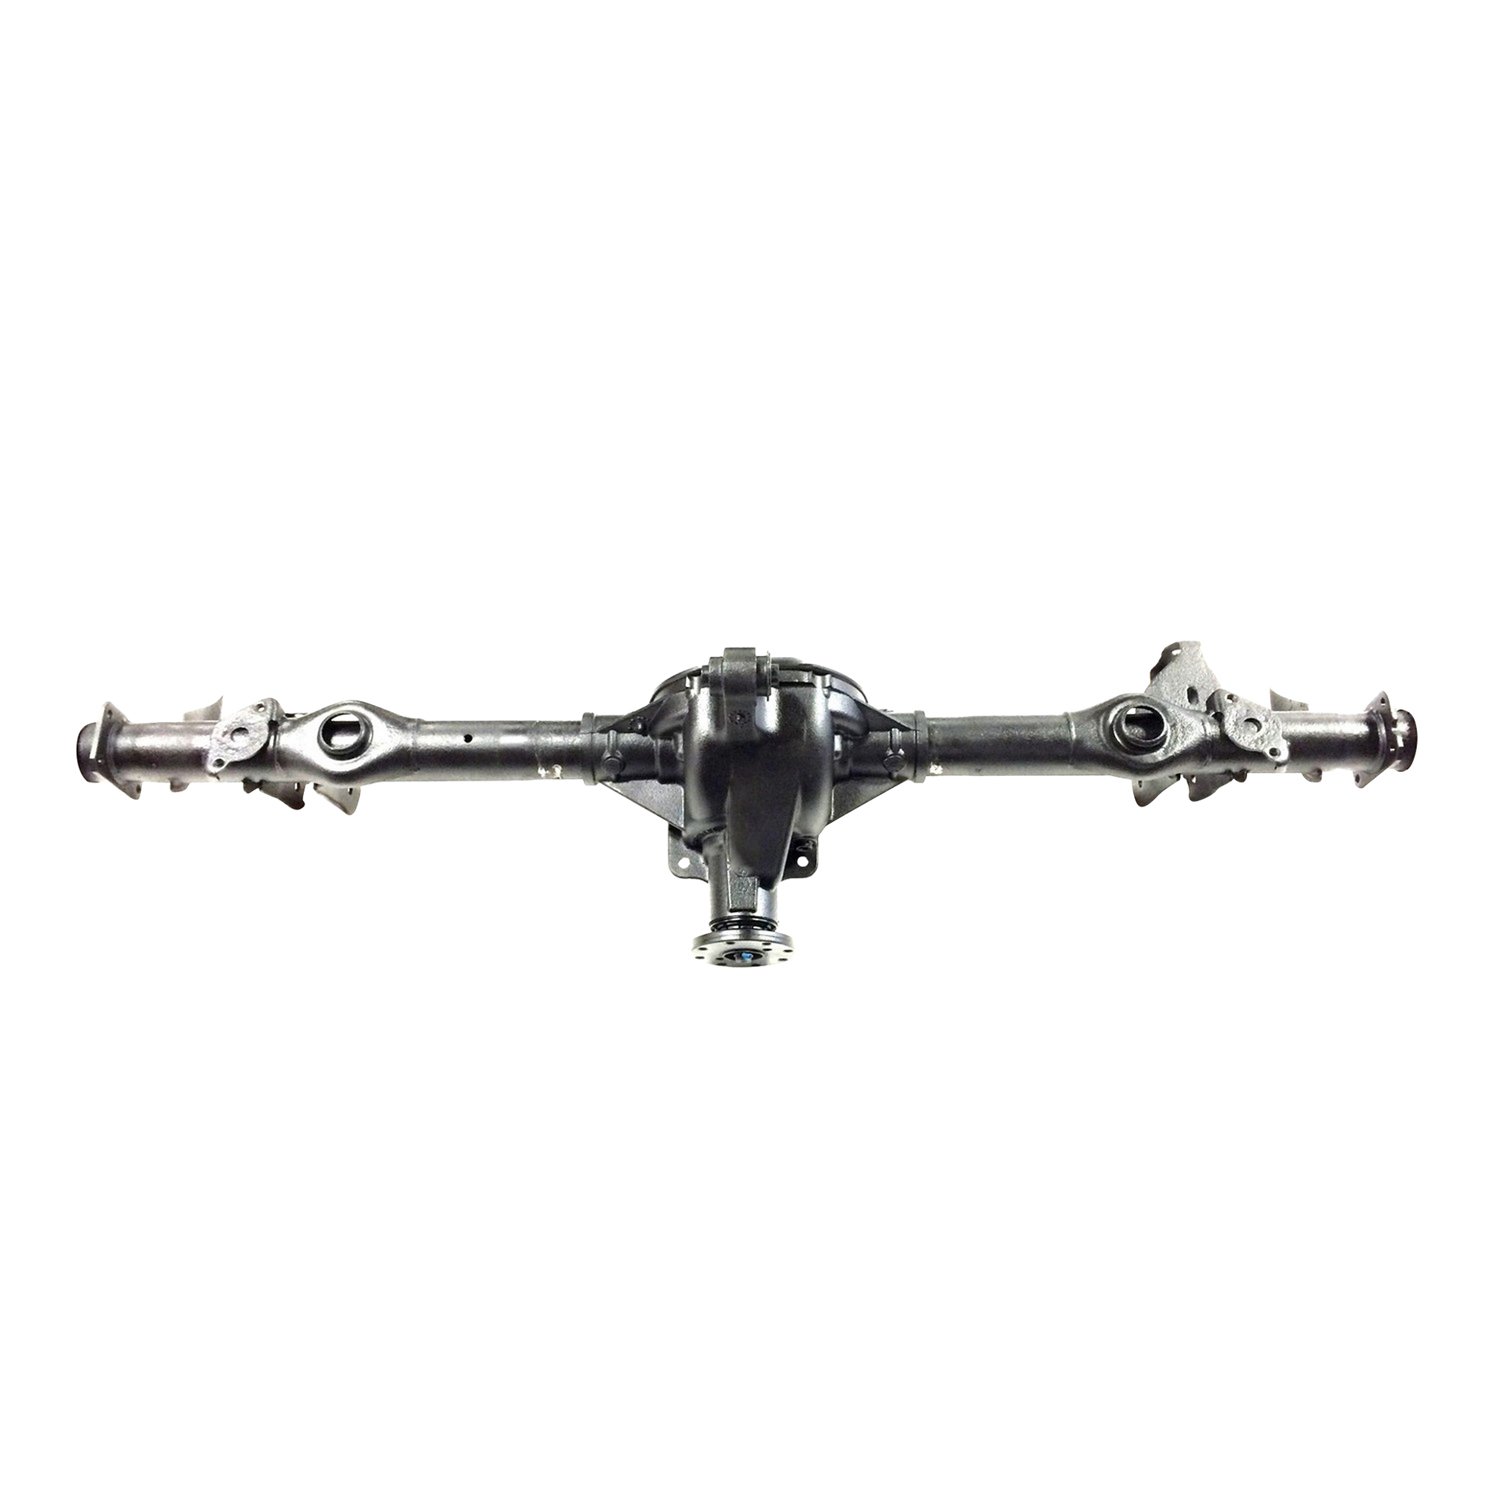 Remanufactured Complete Axle Assembly for 7.5" 05-10 Mustang 3.31 with ABS, Posi LSD